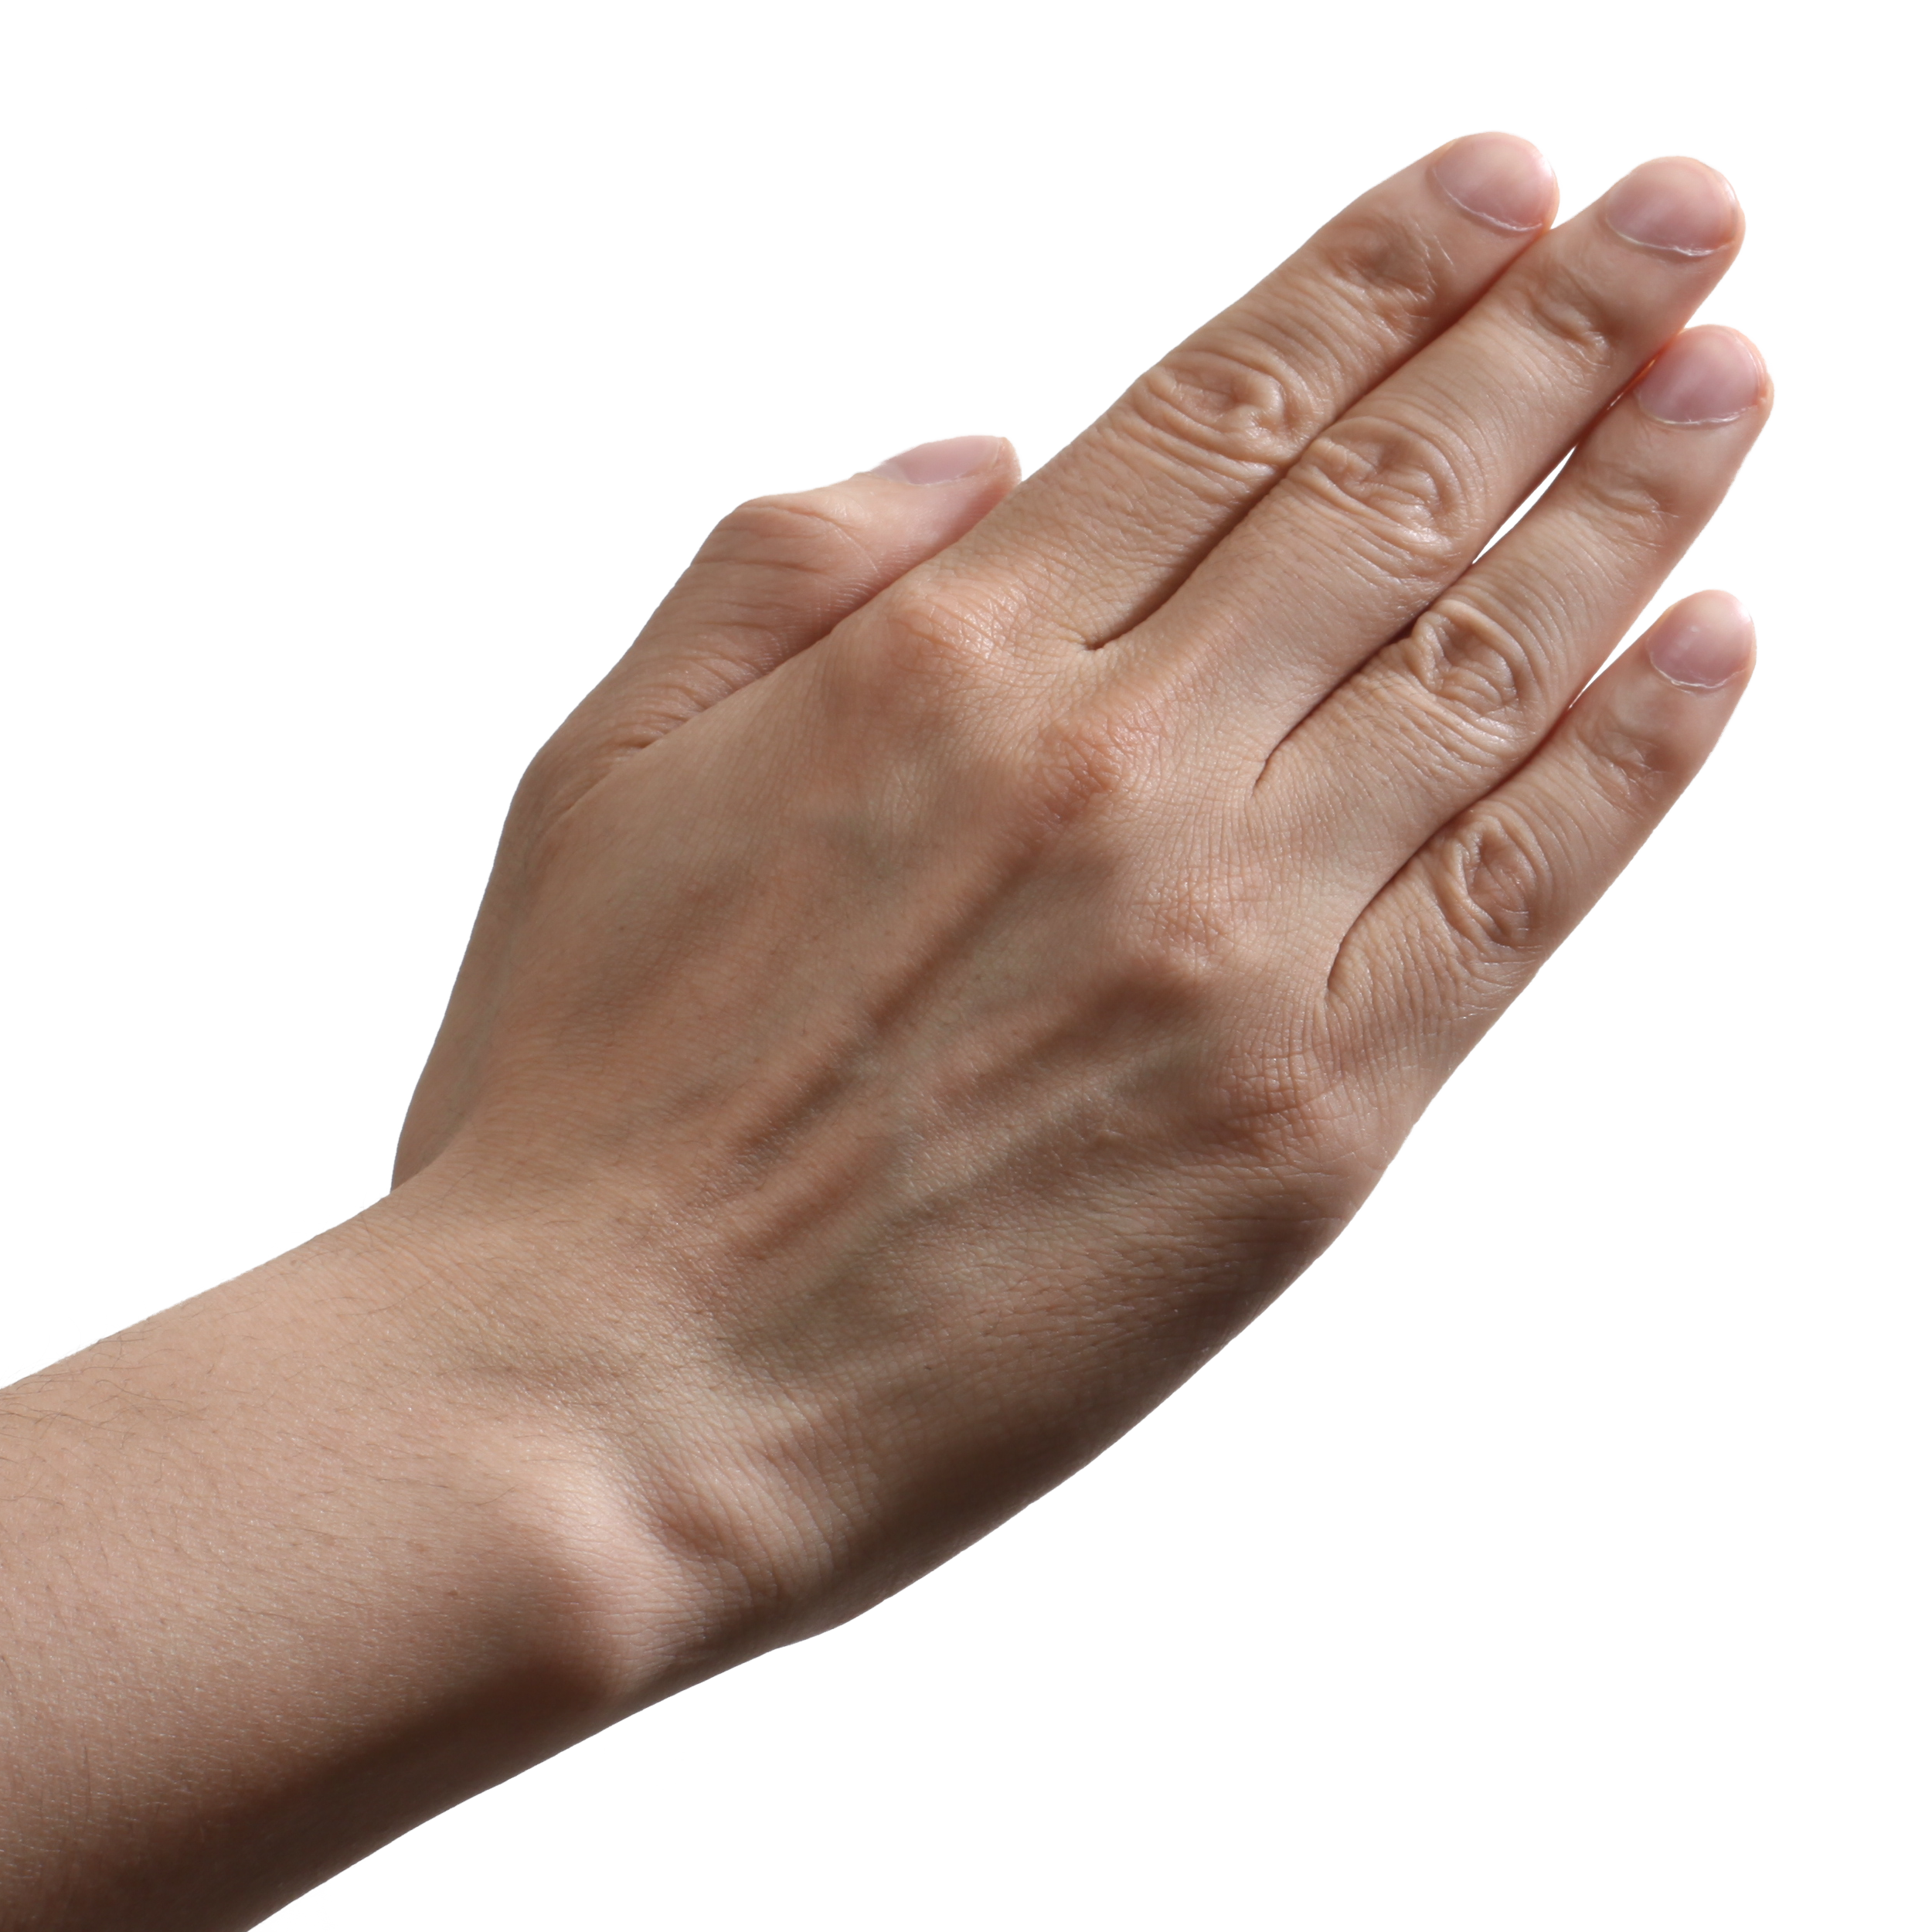 Hands png, hand image picture #44749 - Free Icons and PNG Backgrounds